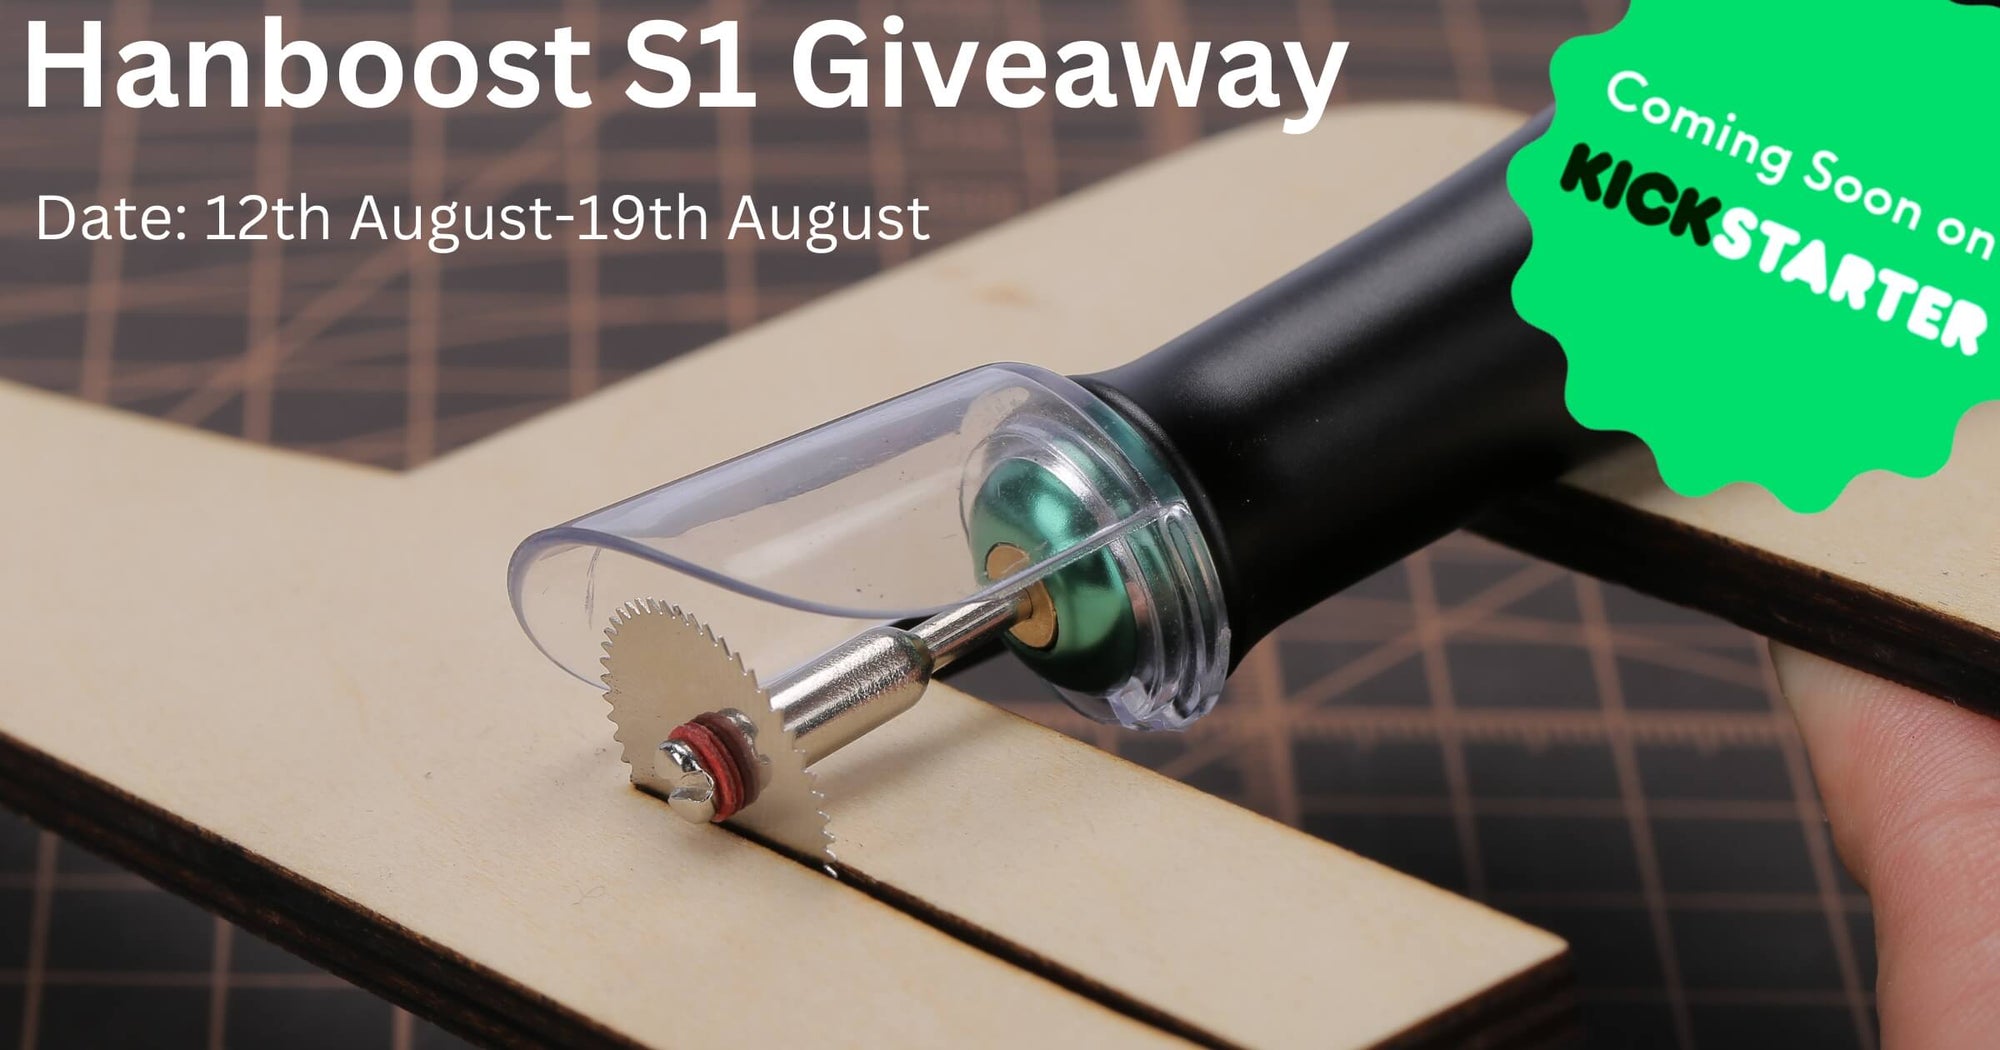 Enjoy Hanboost S1 Giveaway – A Celebration of Innovation and Community